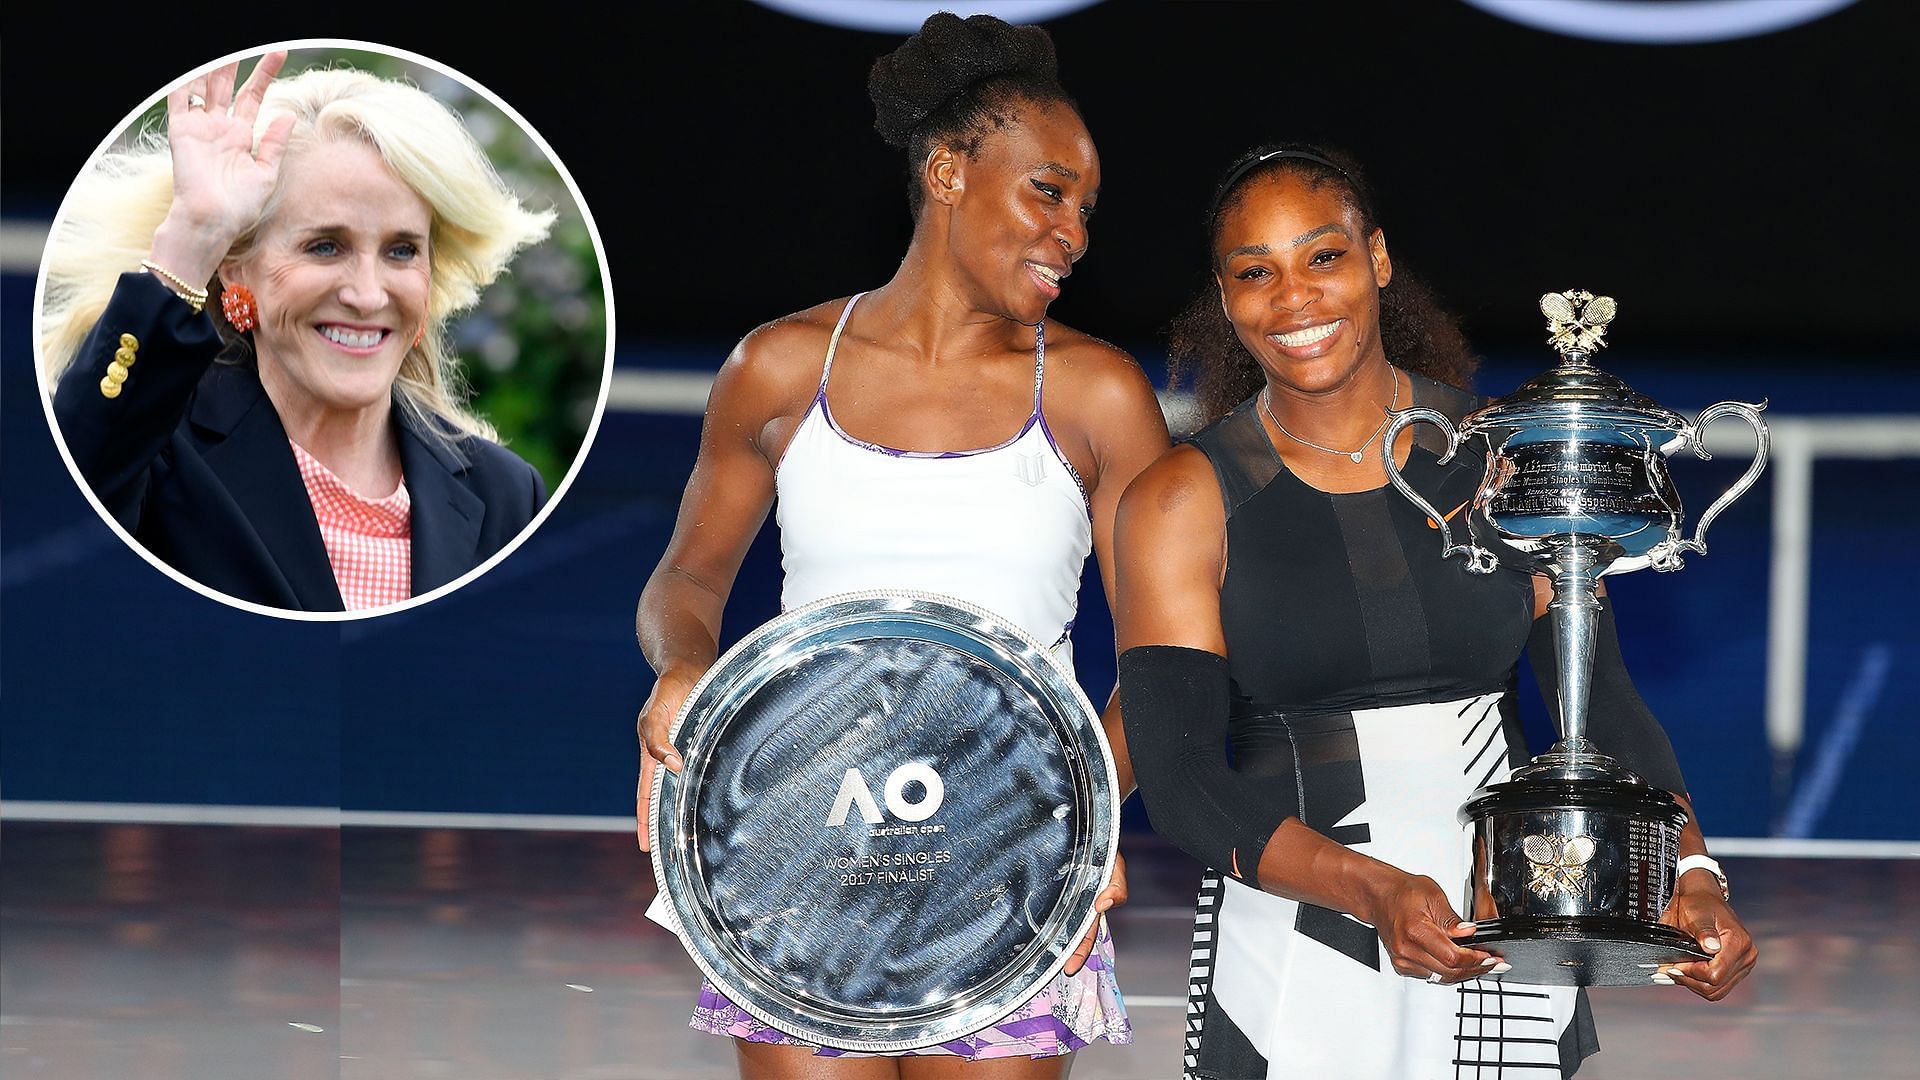 The Williams sisters - Venus (left) and Serena (right) and inset, Tracy Austin